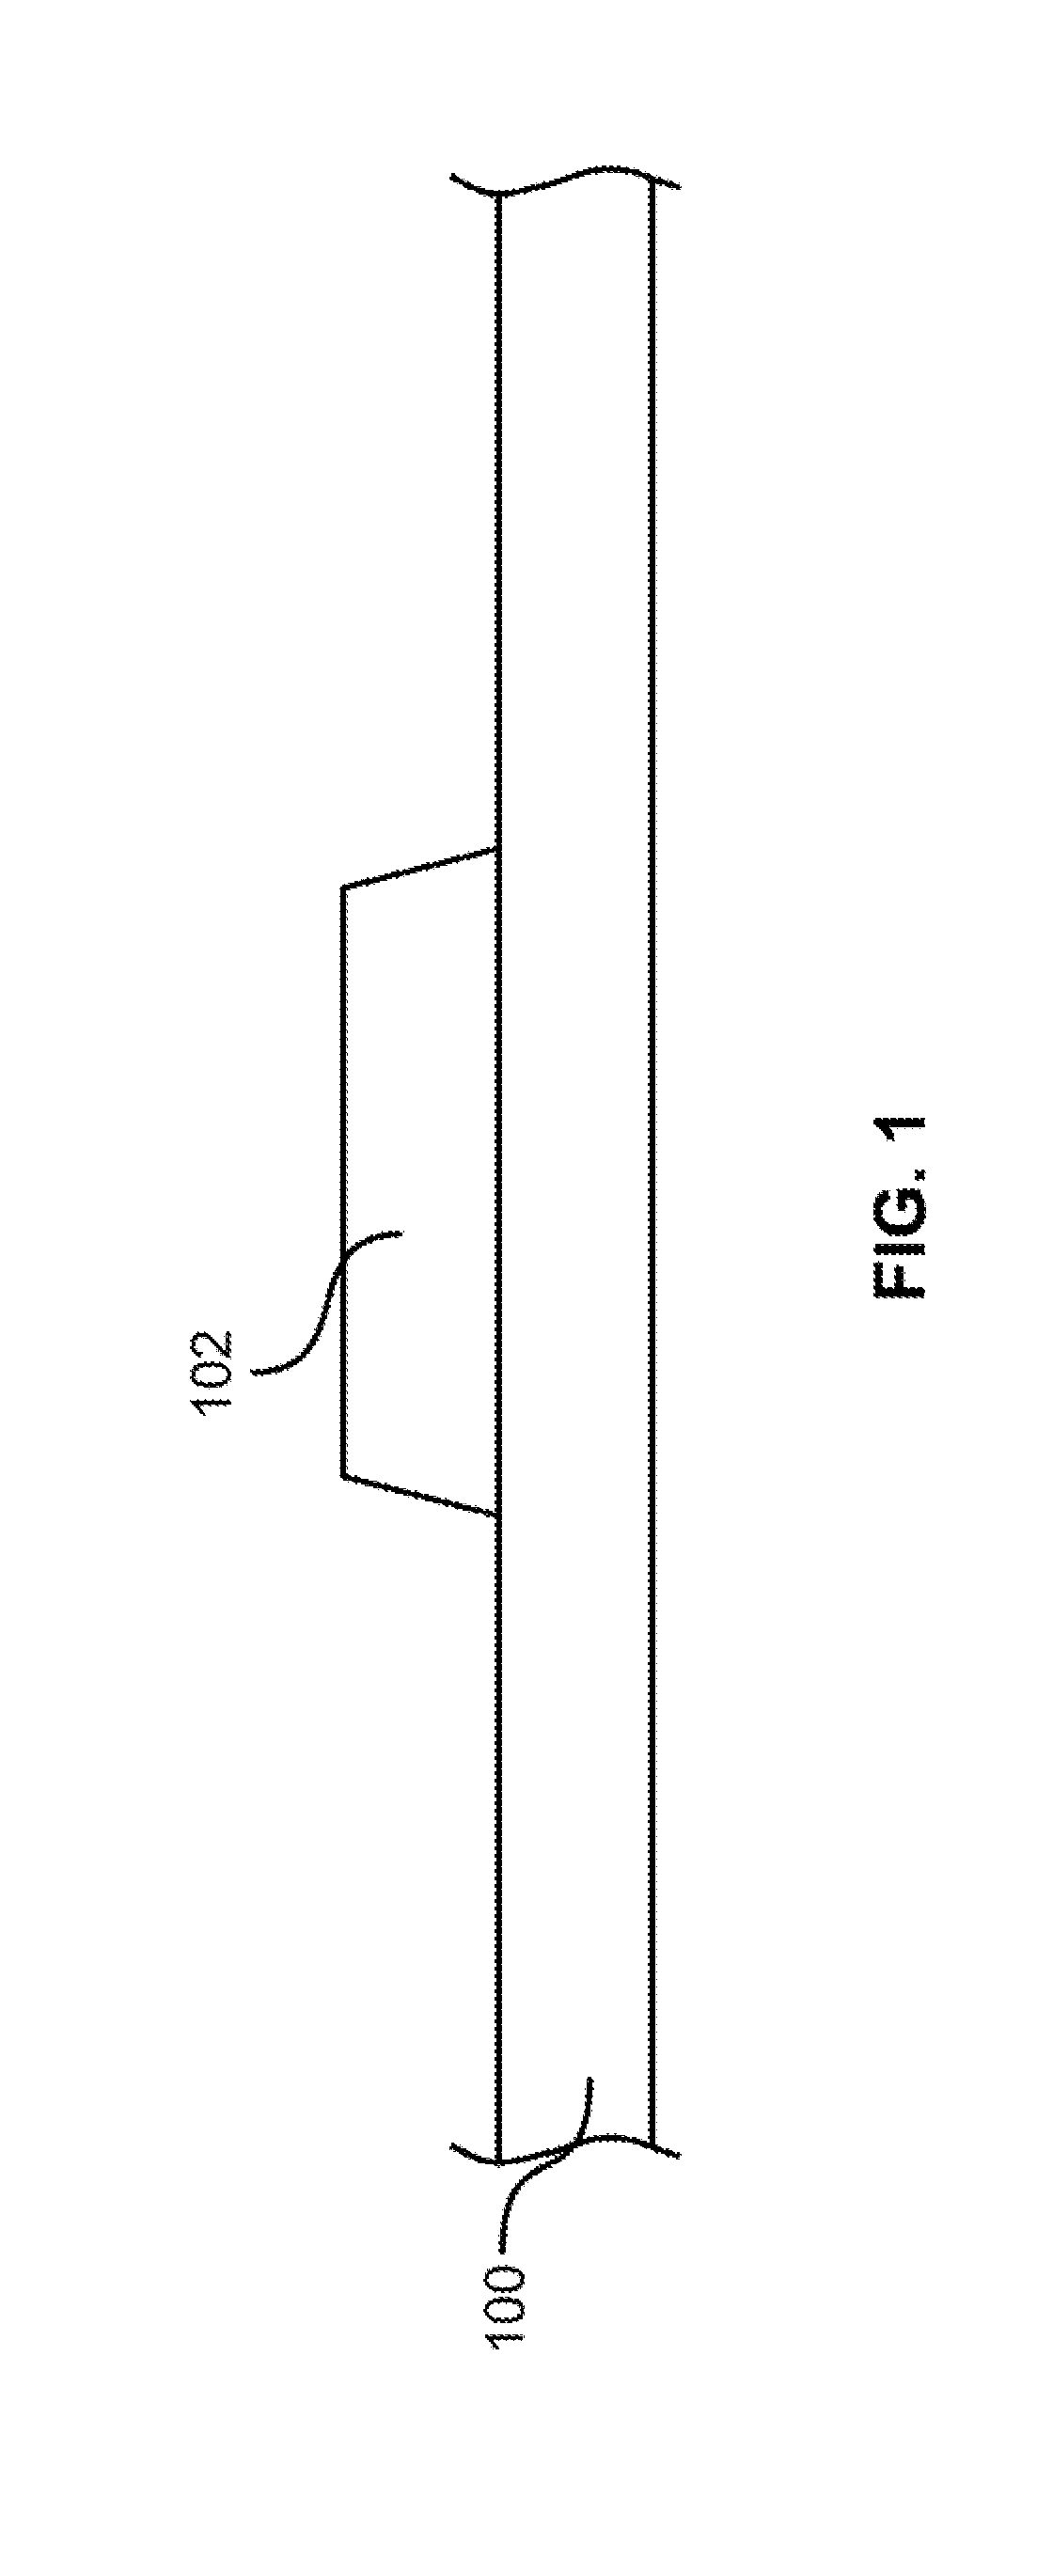 IGZO with Intra-Layer Variations and Methods for Forming the Same